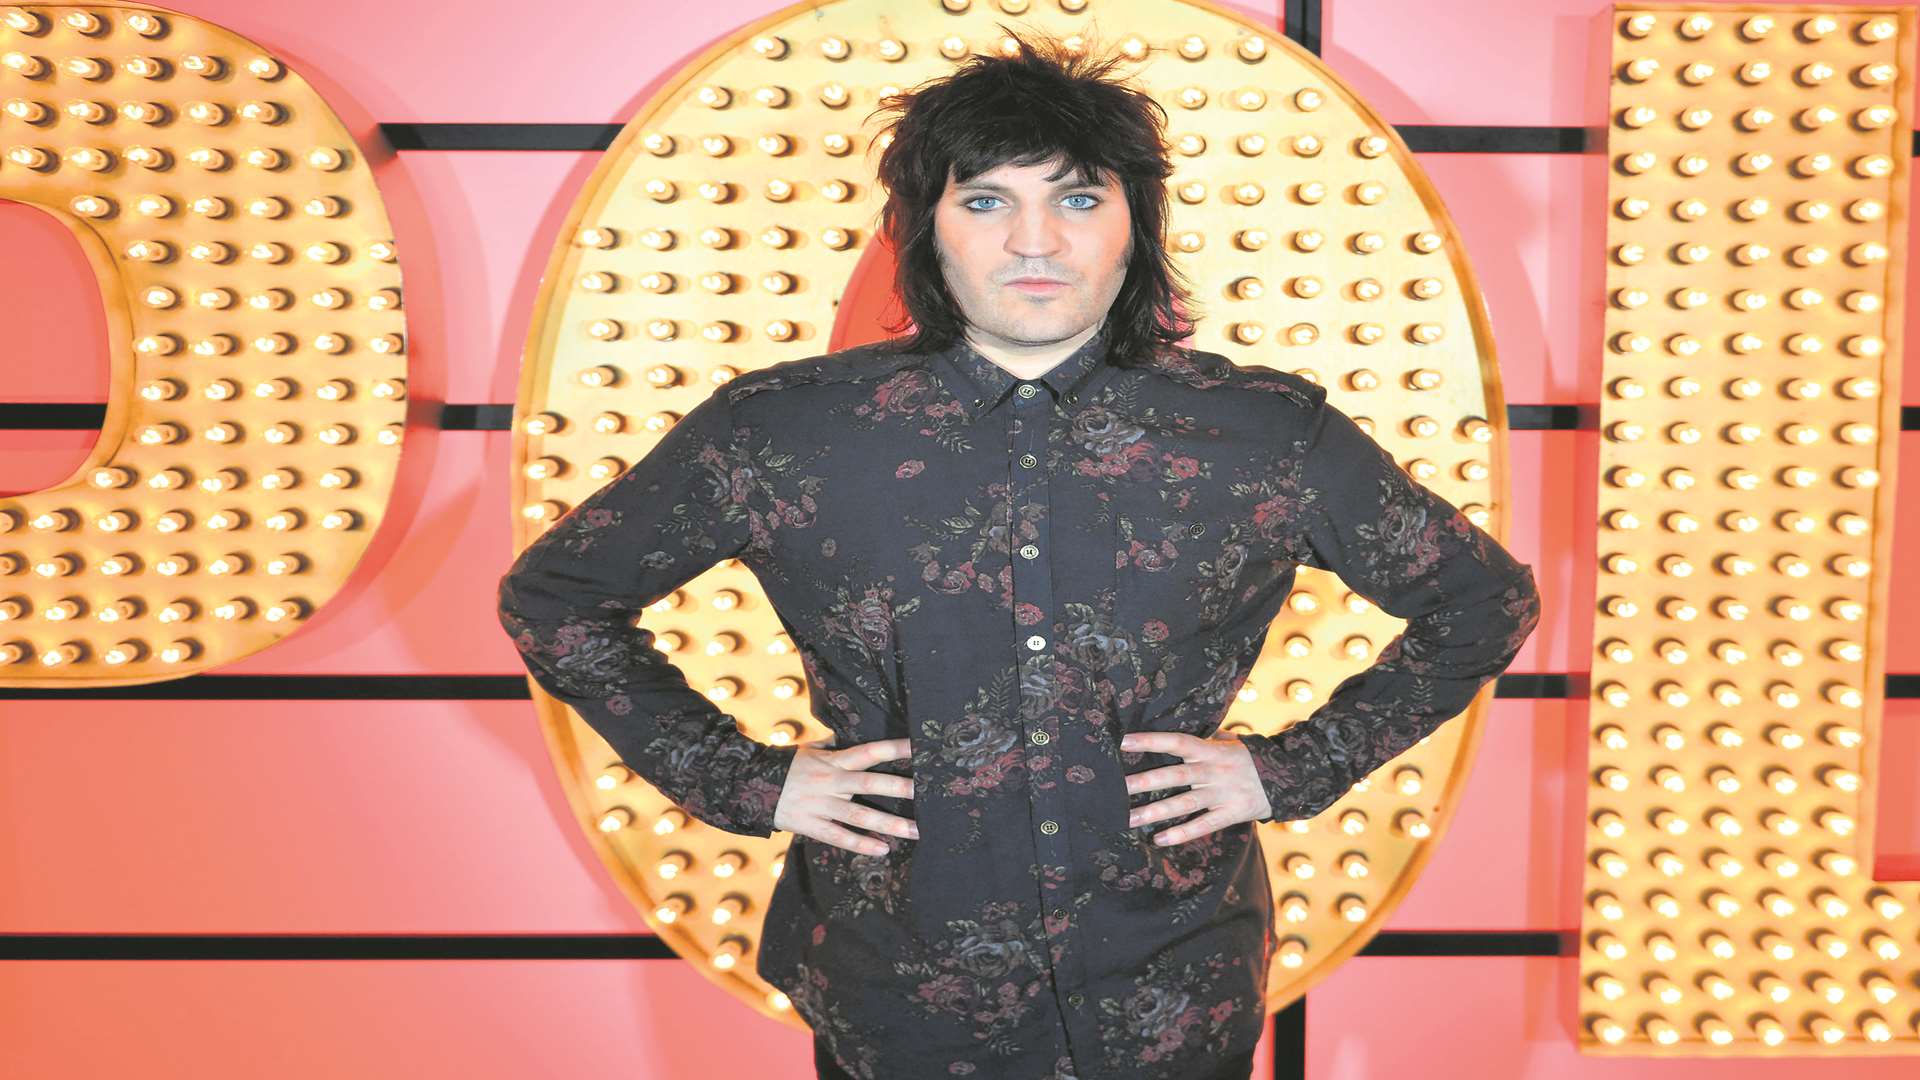 Noel Fielding will be joining the line-up